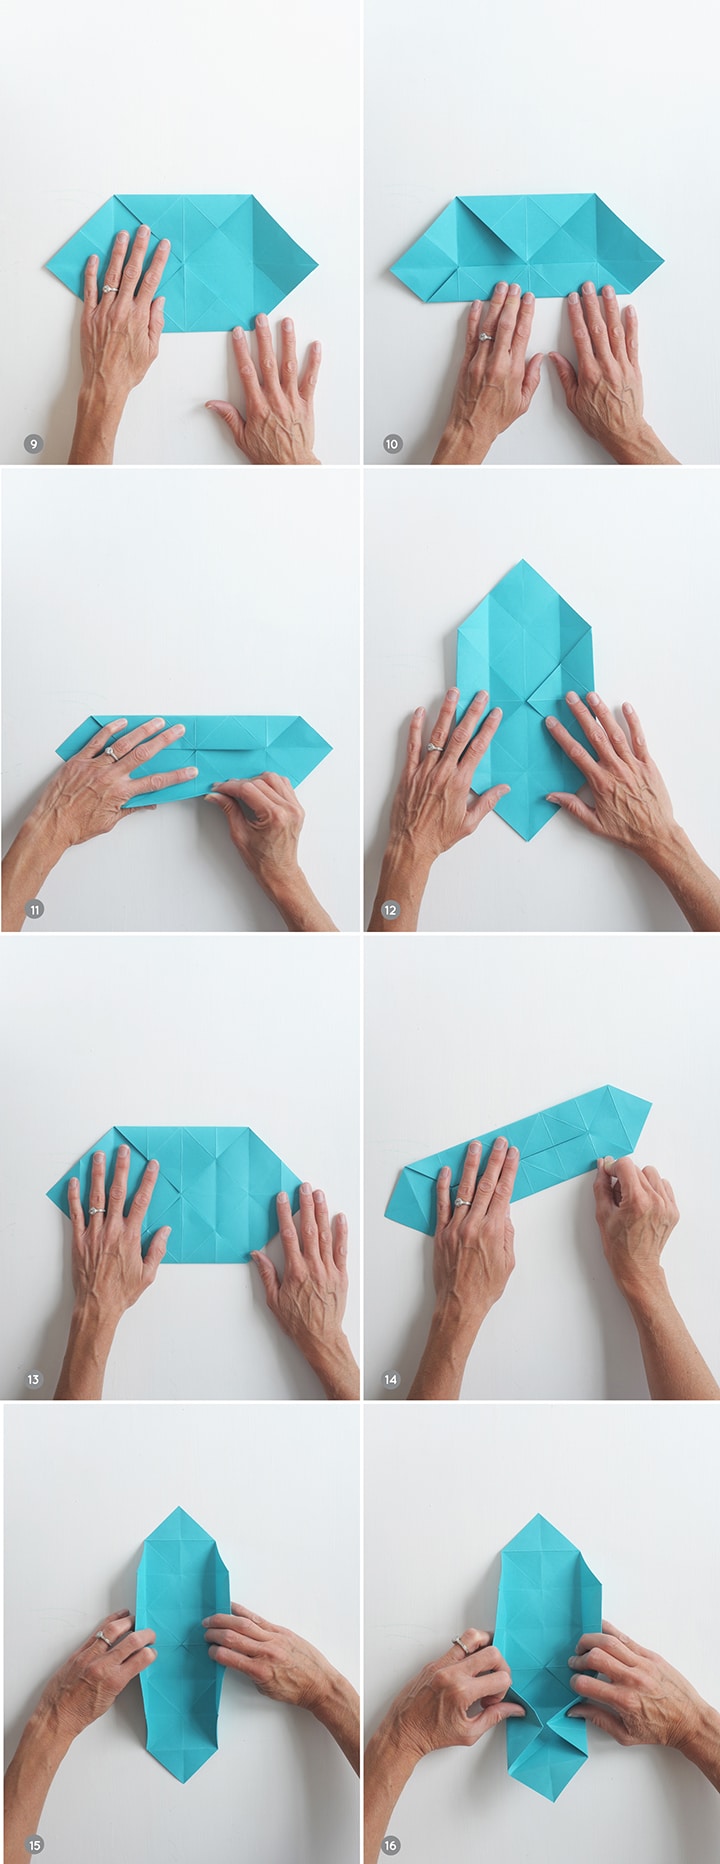 how to make an paper box step by step